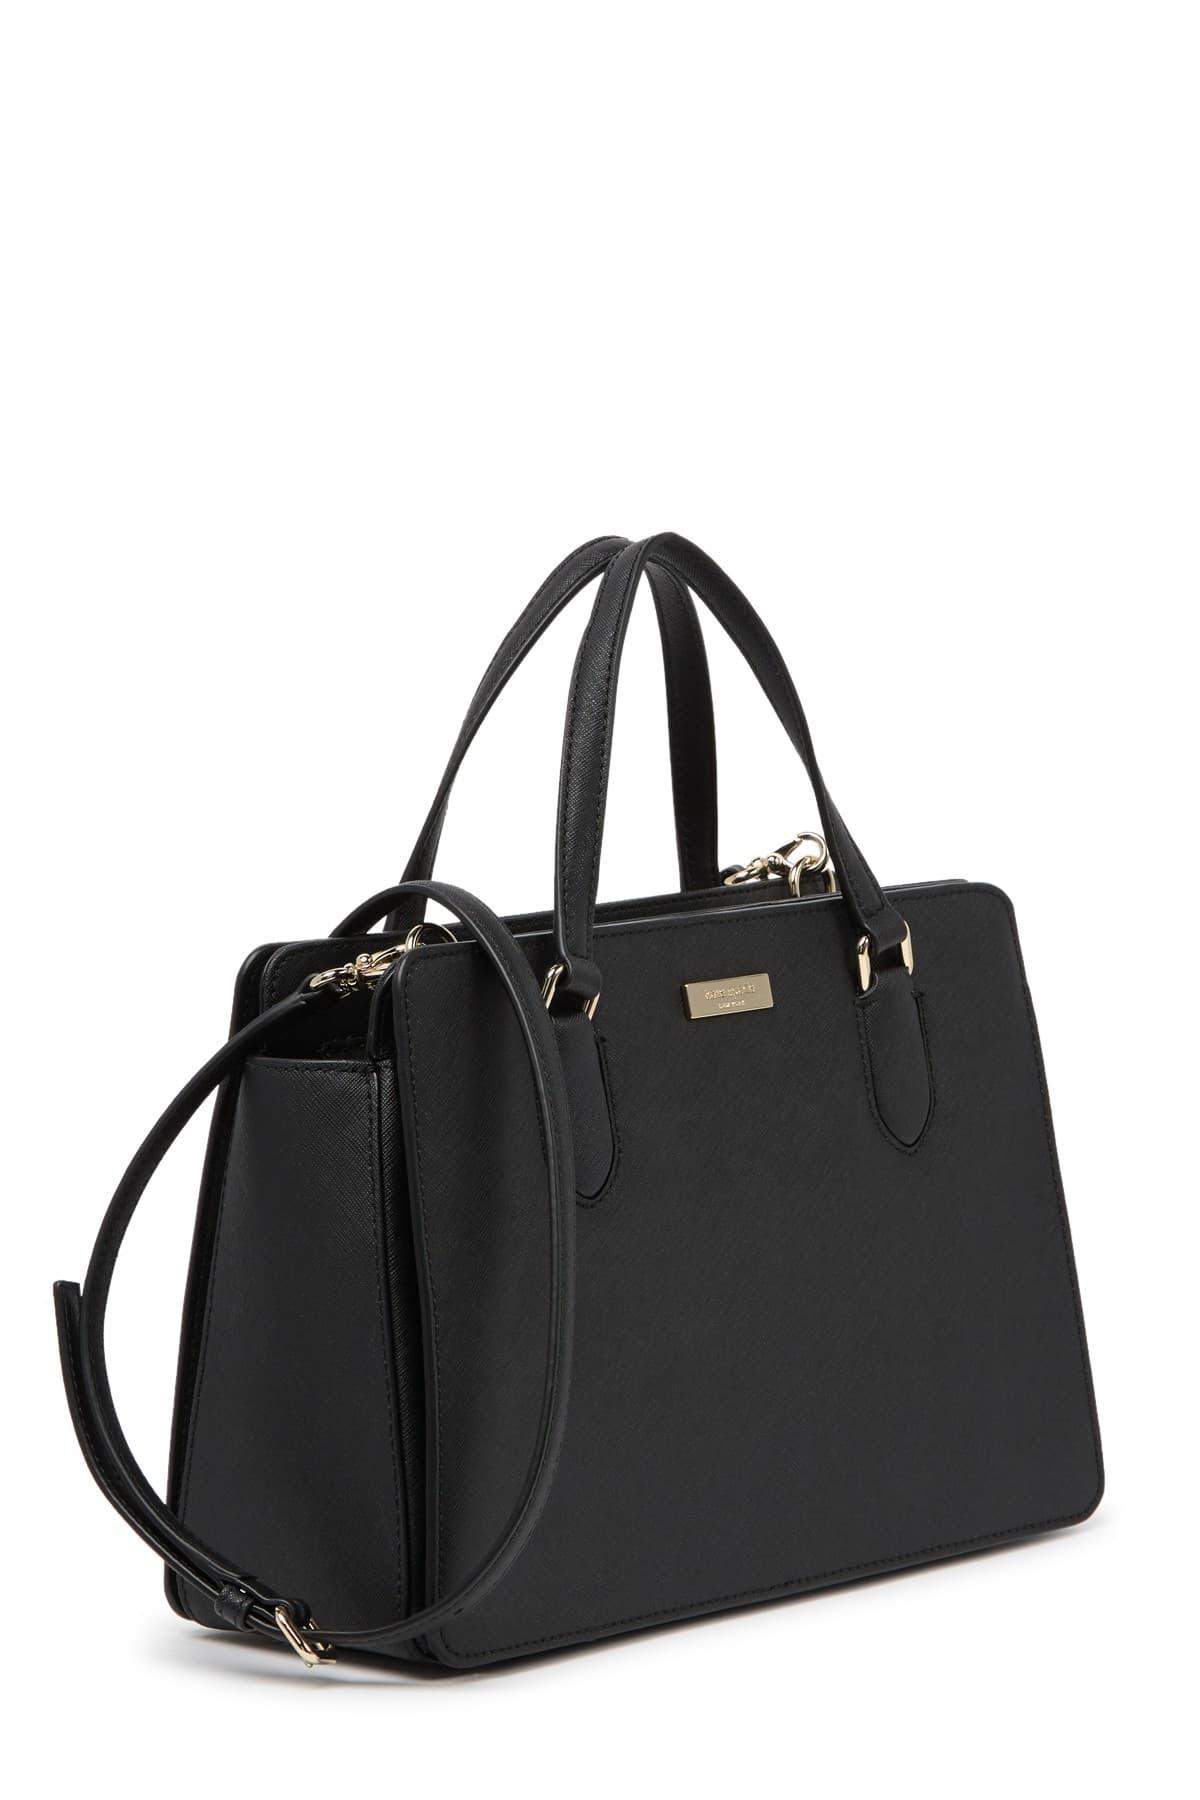 Kate Spade Laurel Way Reese Saffiano Leather Satchel in Black | Lyst